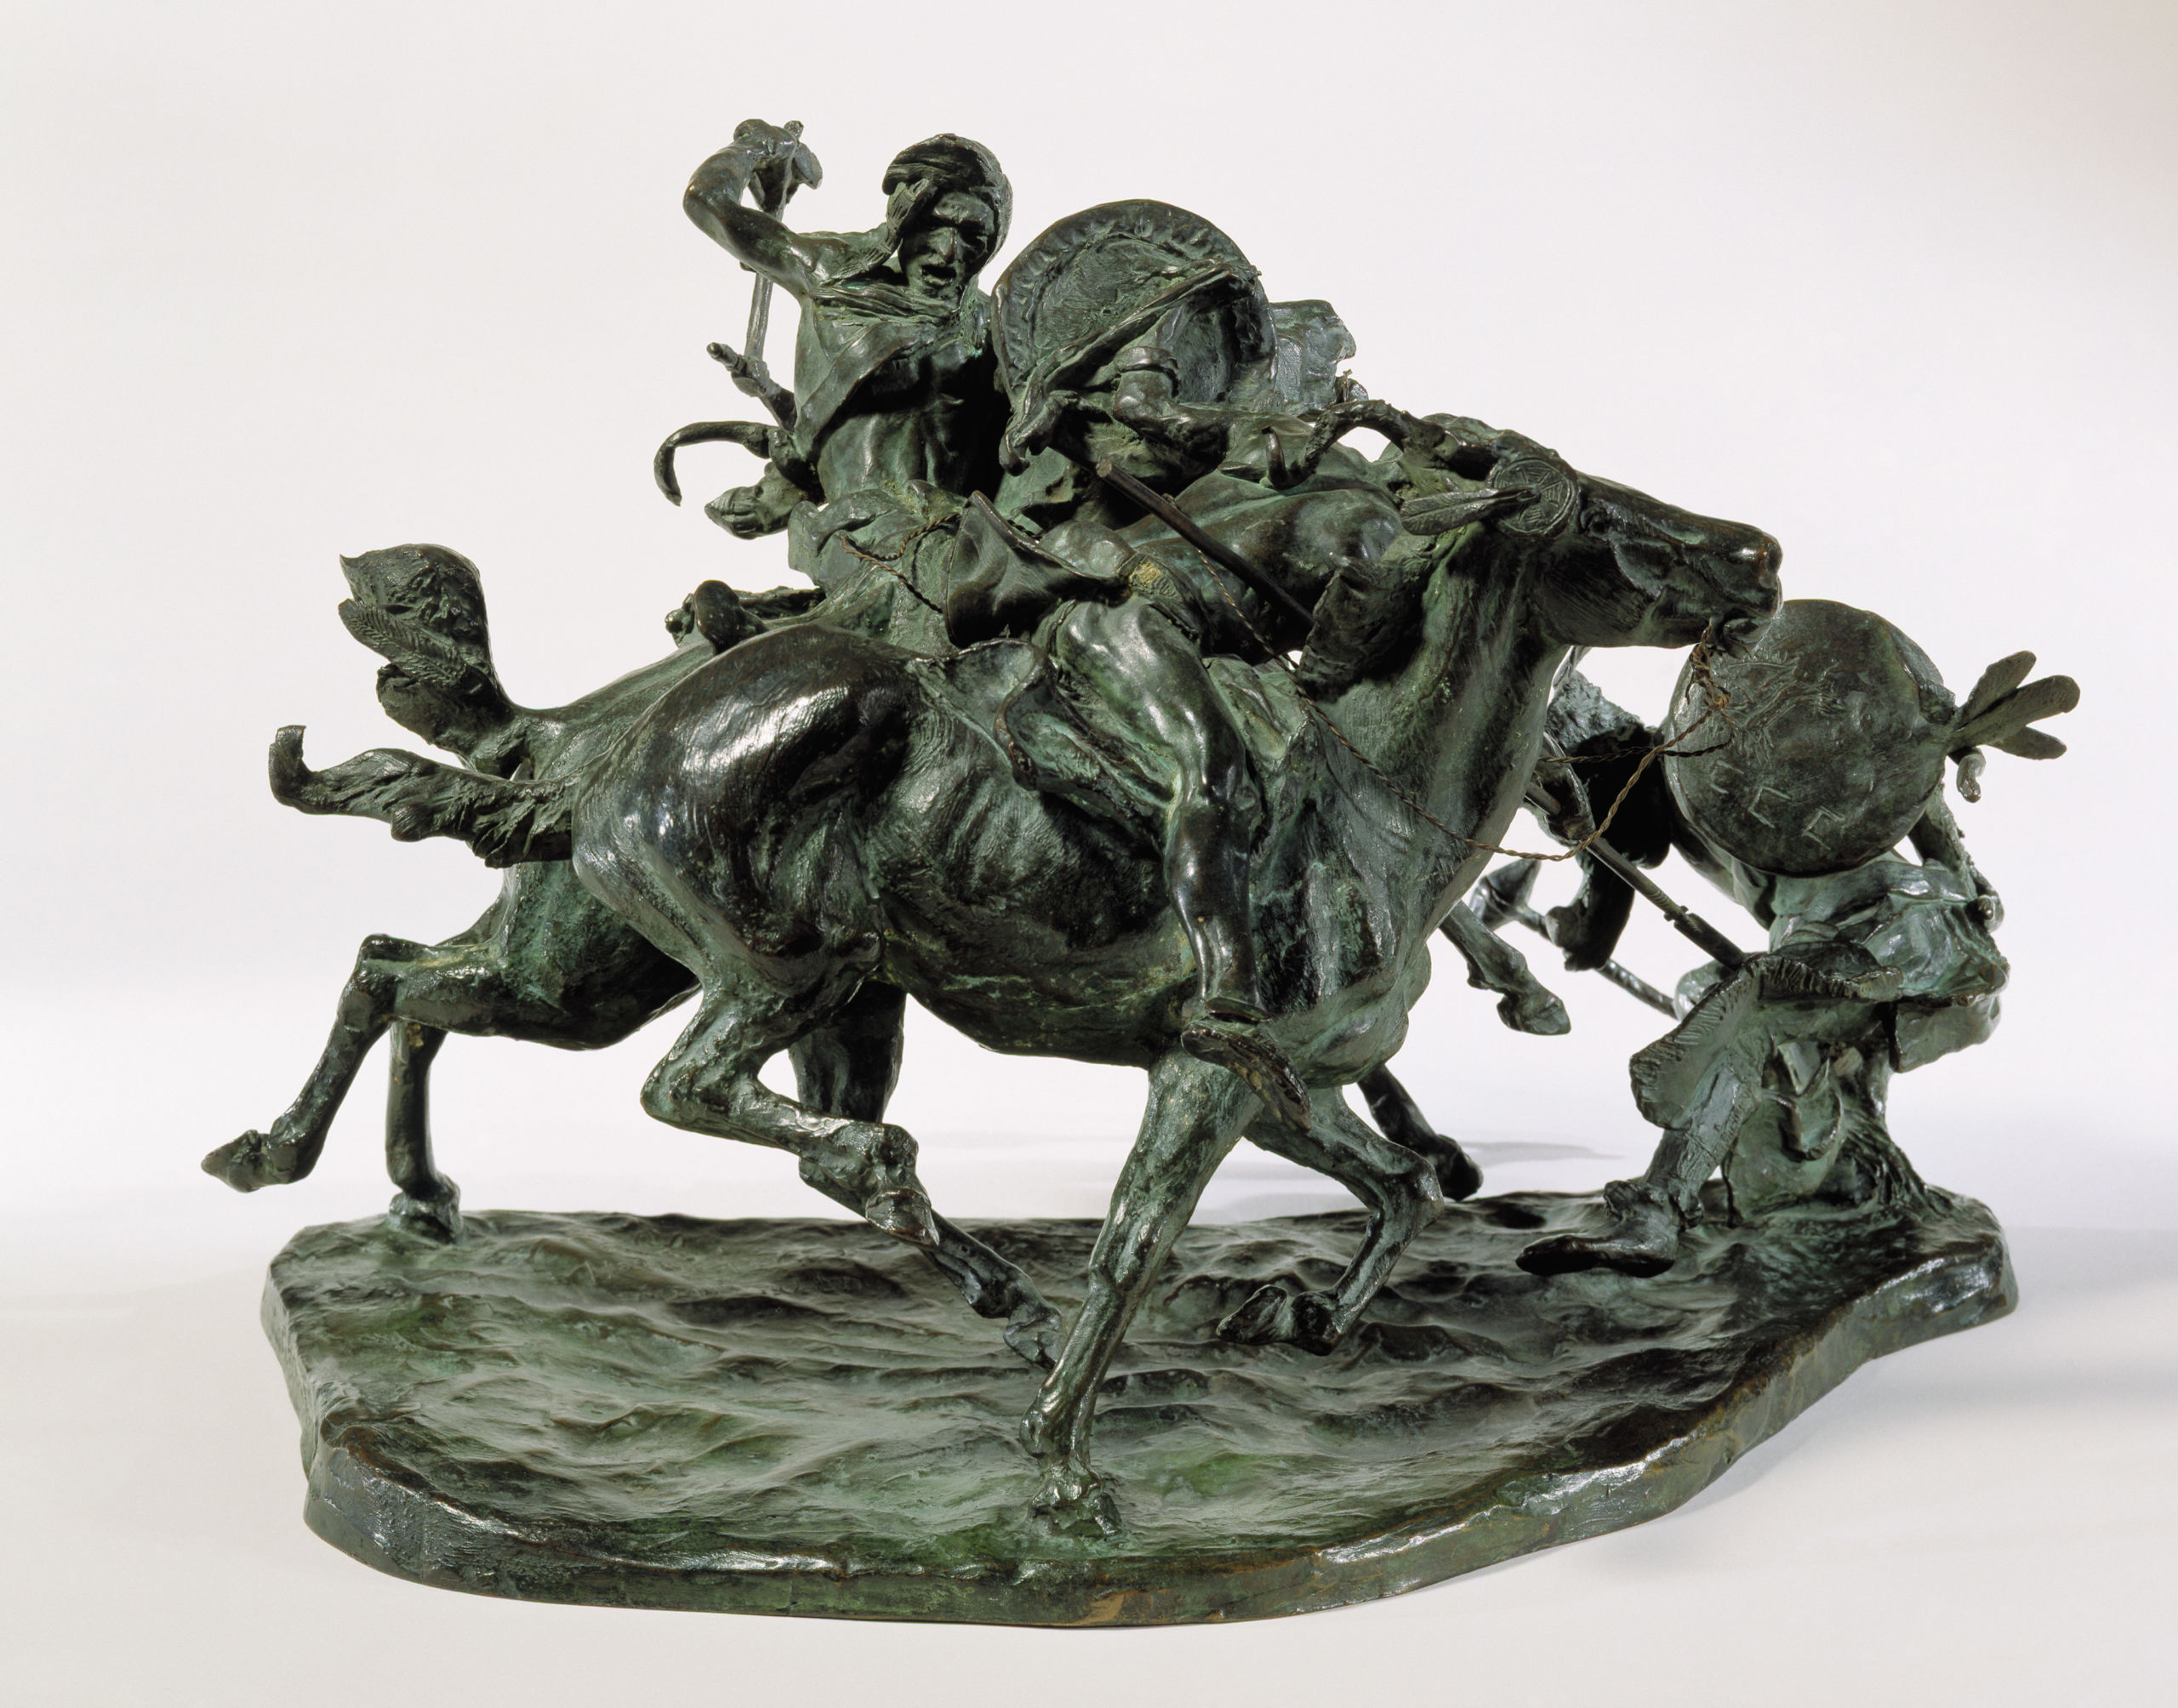 bronze sculpture of American Indians fighting each other